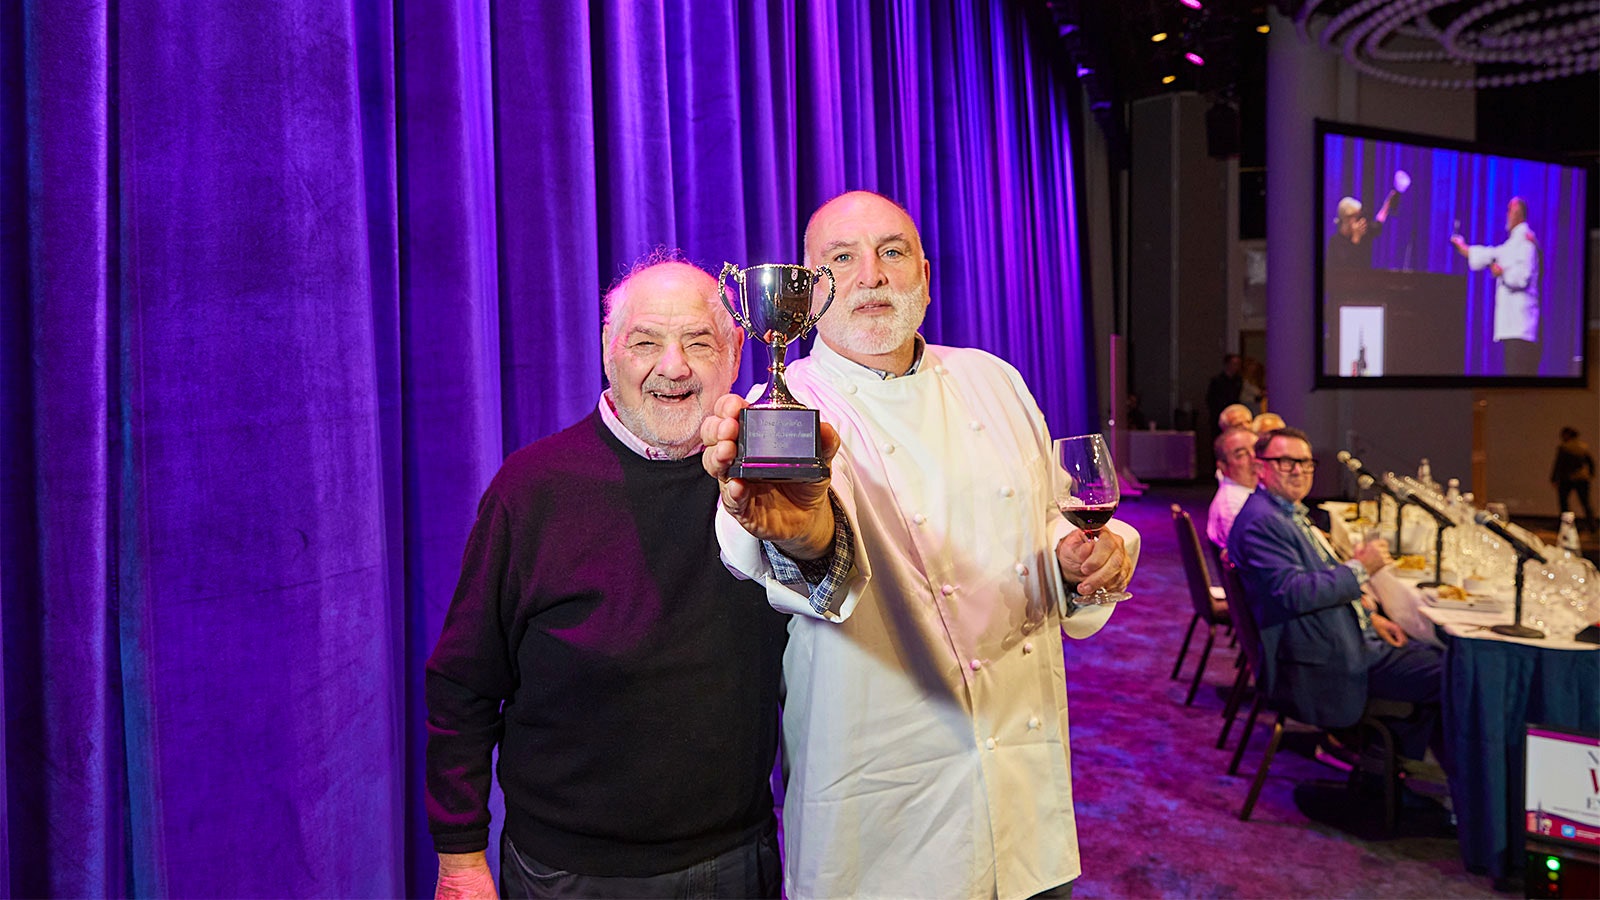  Chef José Andres holds the trophy as close to the camera as possible while he has arm around Marvin R. Shanken